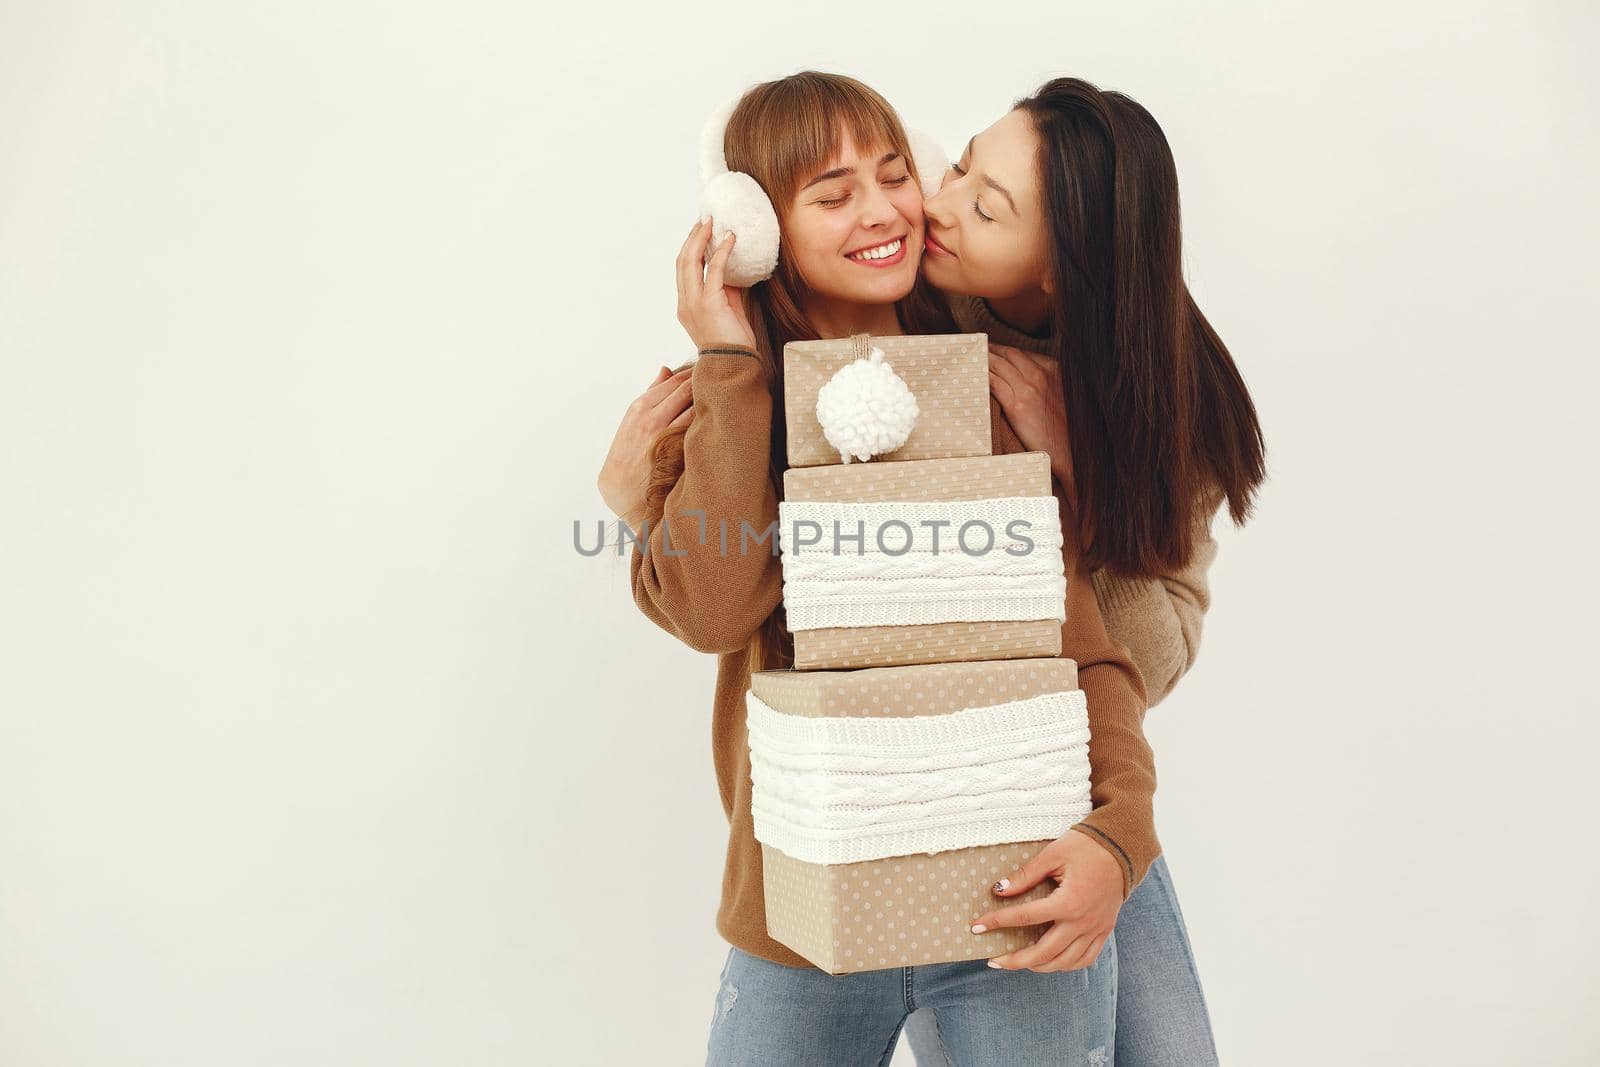 Beautiful girls have fun in a studio with presents by prostooleh